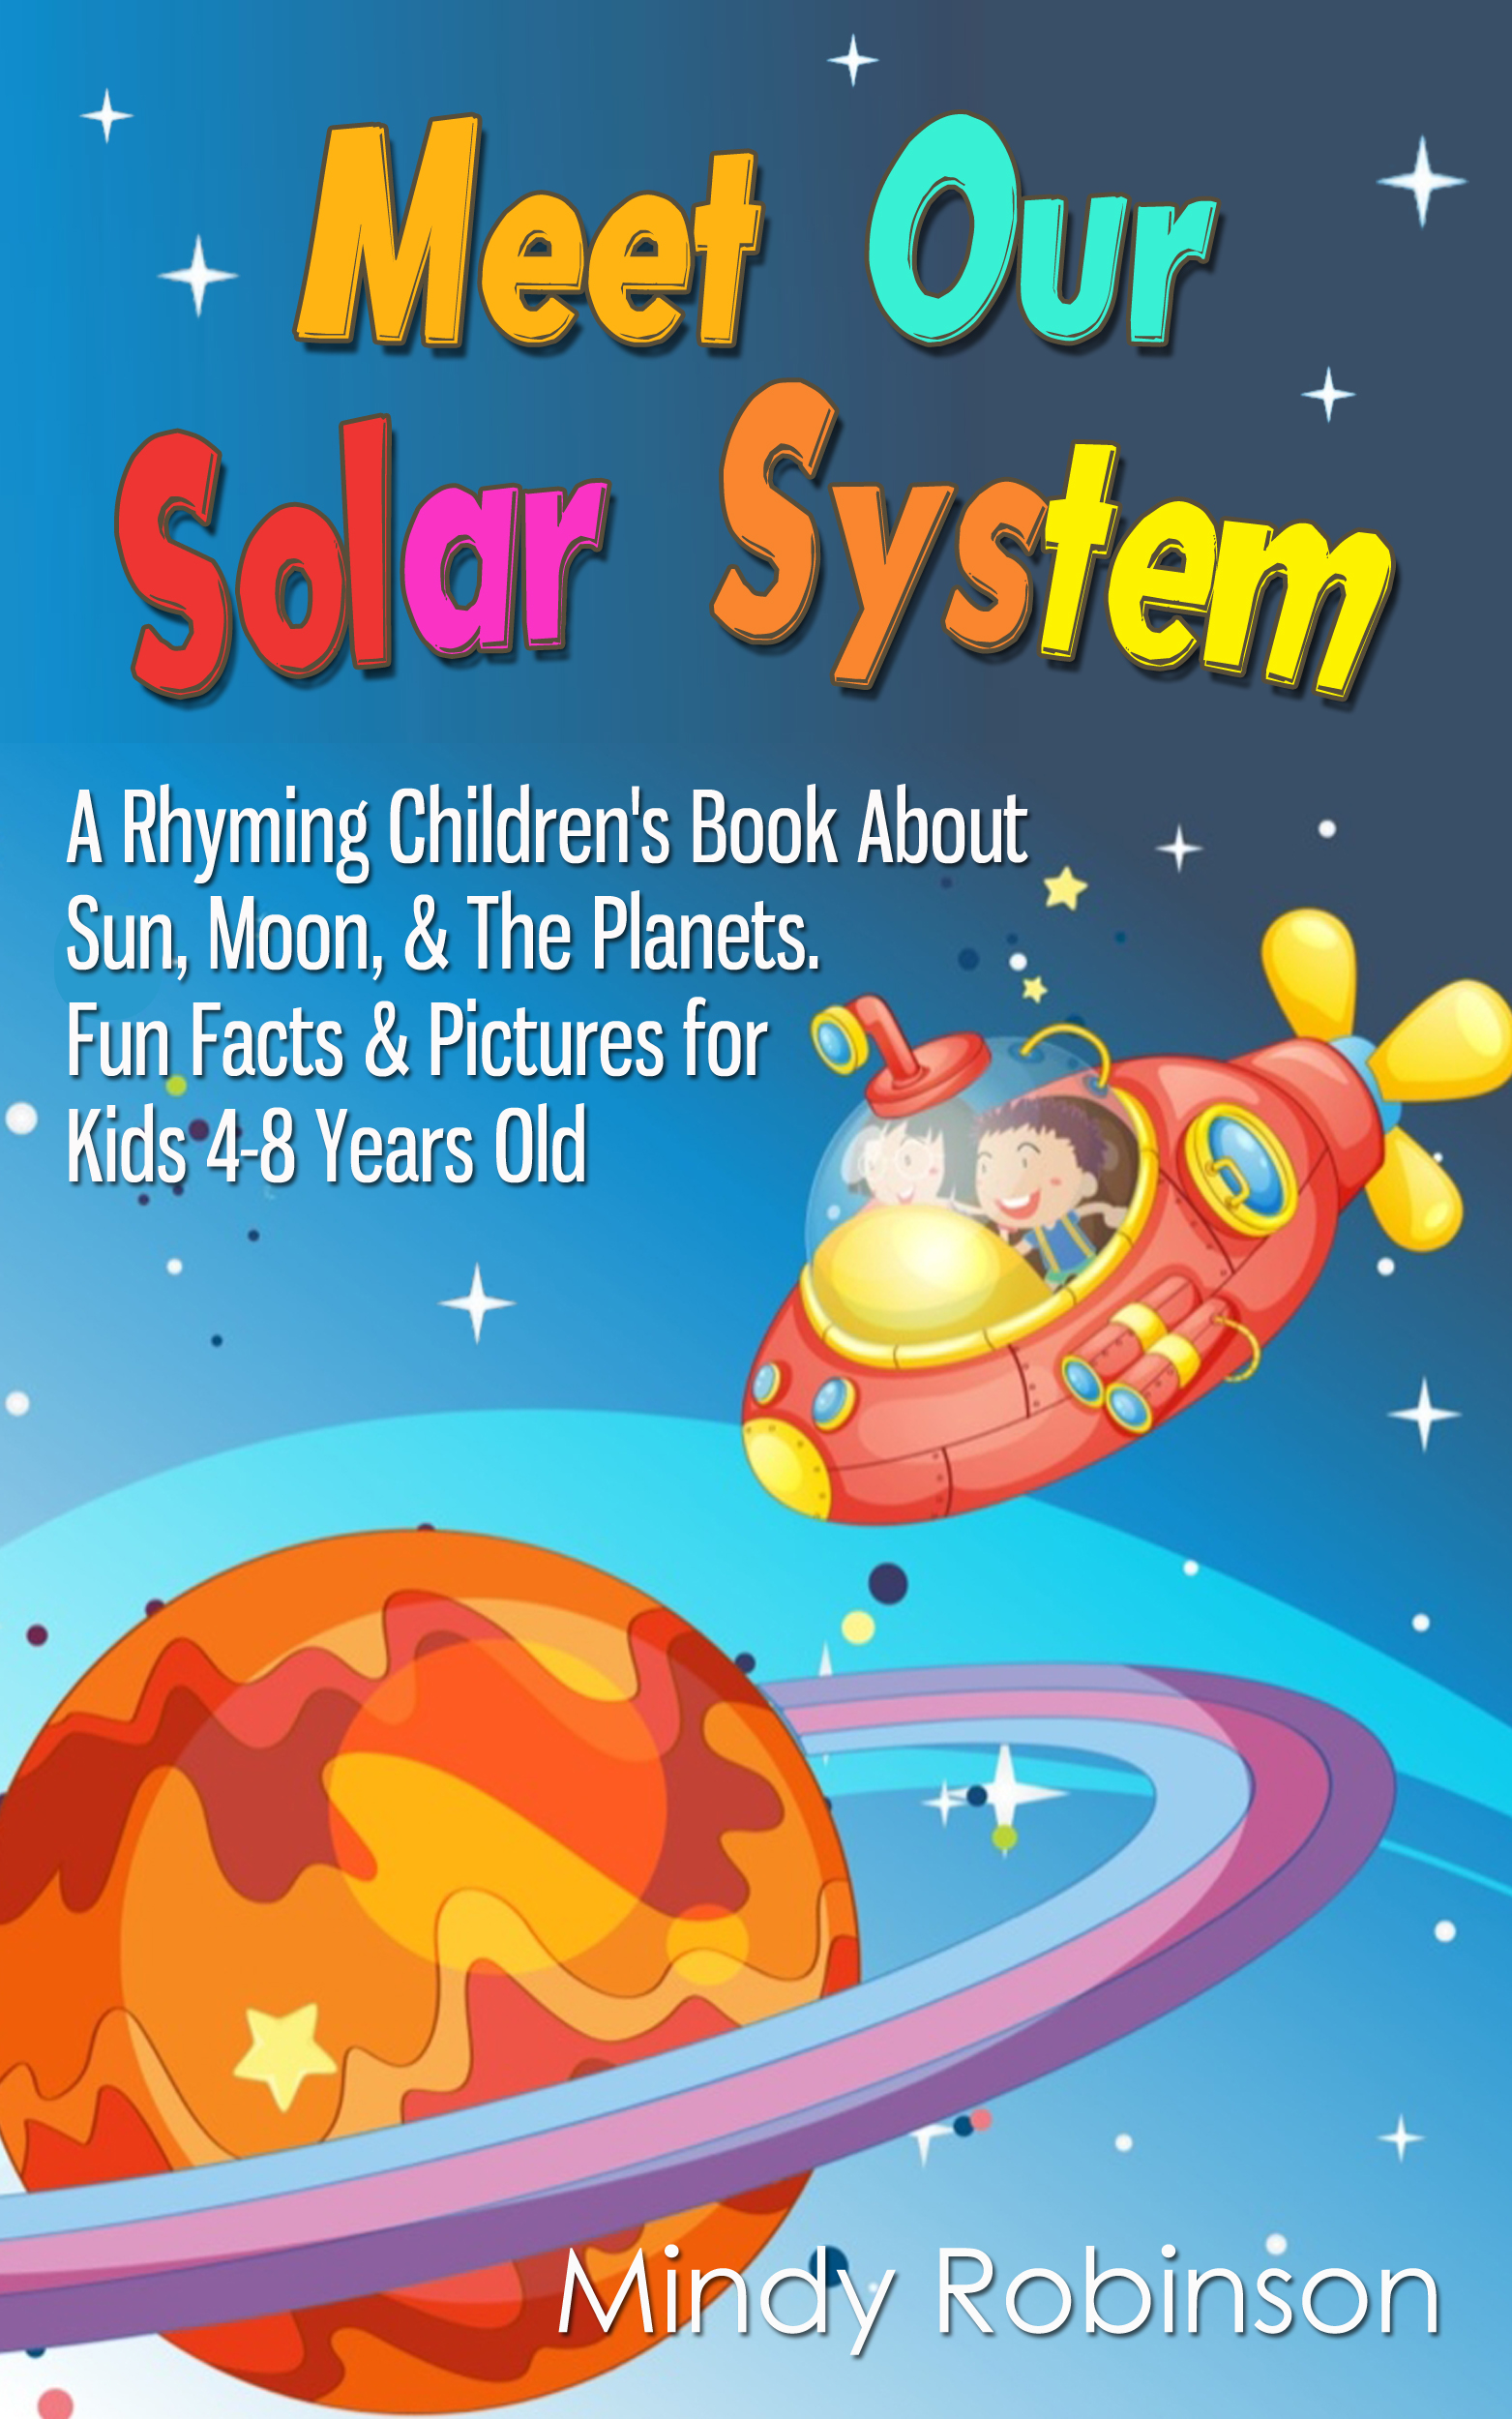 Meet Our Solar System A Rhyming Childrens Book About Sun Moon The Planets Fun Facts Pictures For Kids 4 8 Years Old An Ebook By Mindy